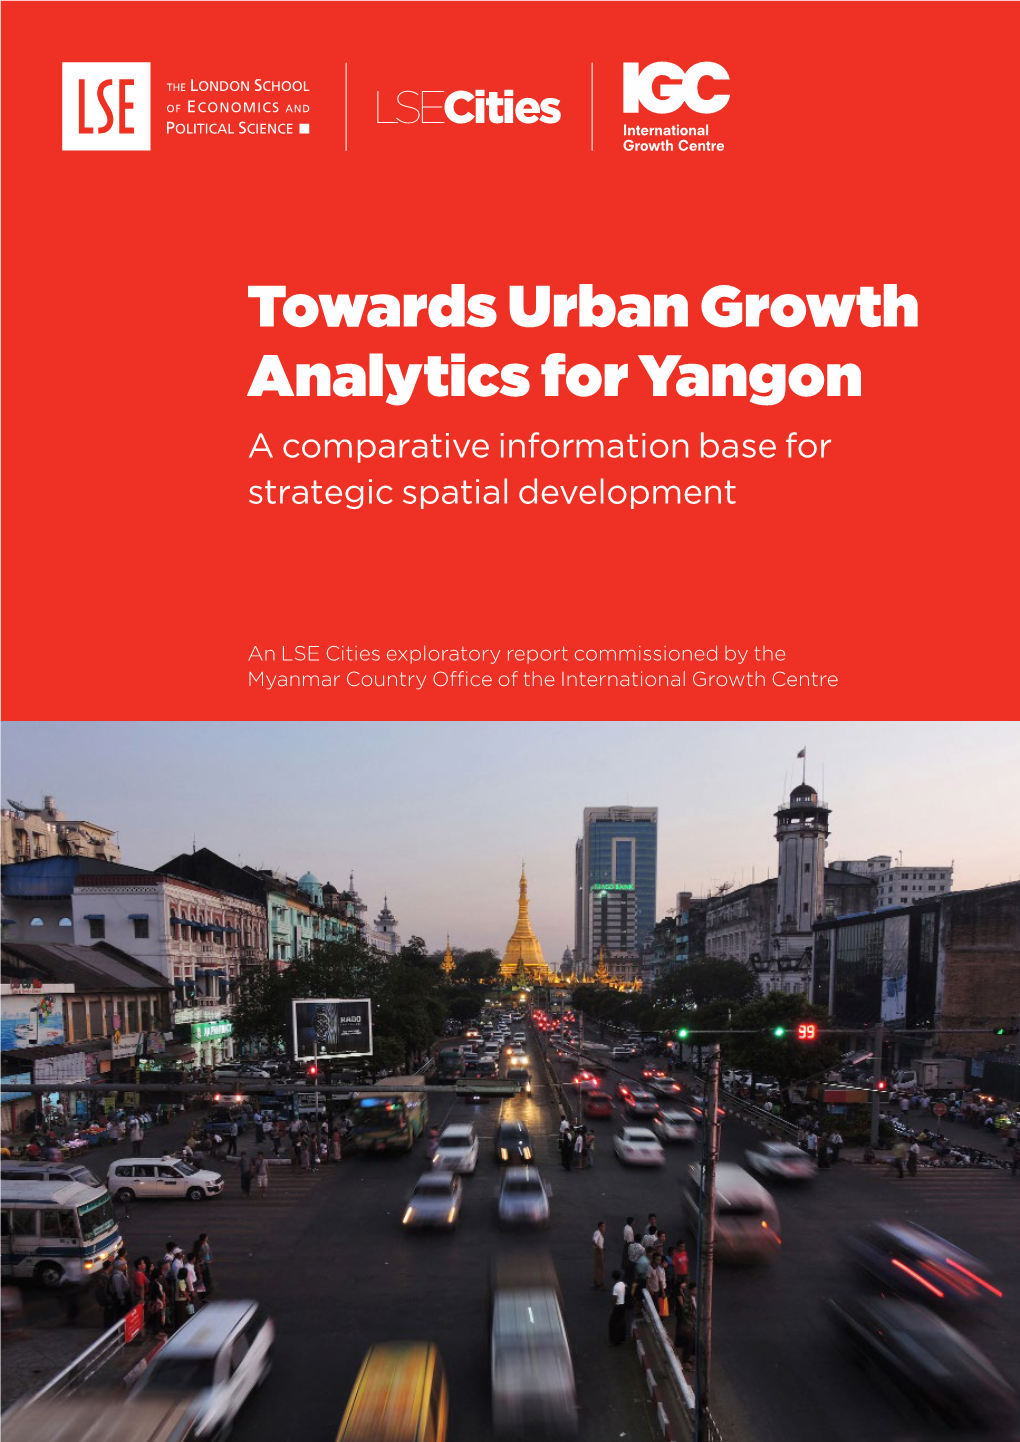 Towards Urban Growth Analytics for Yangon a Comparative Information Base for Strategic Spatial Development